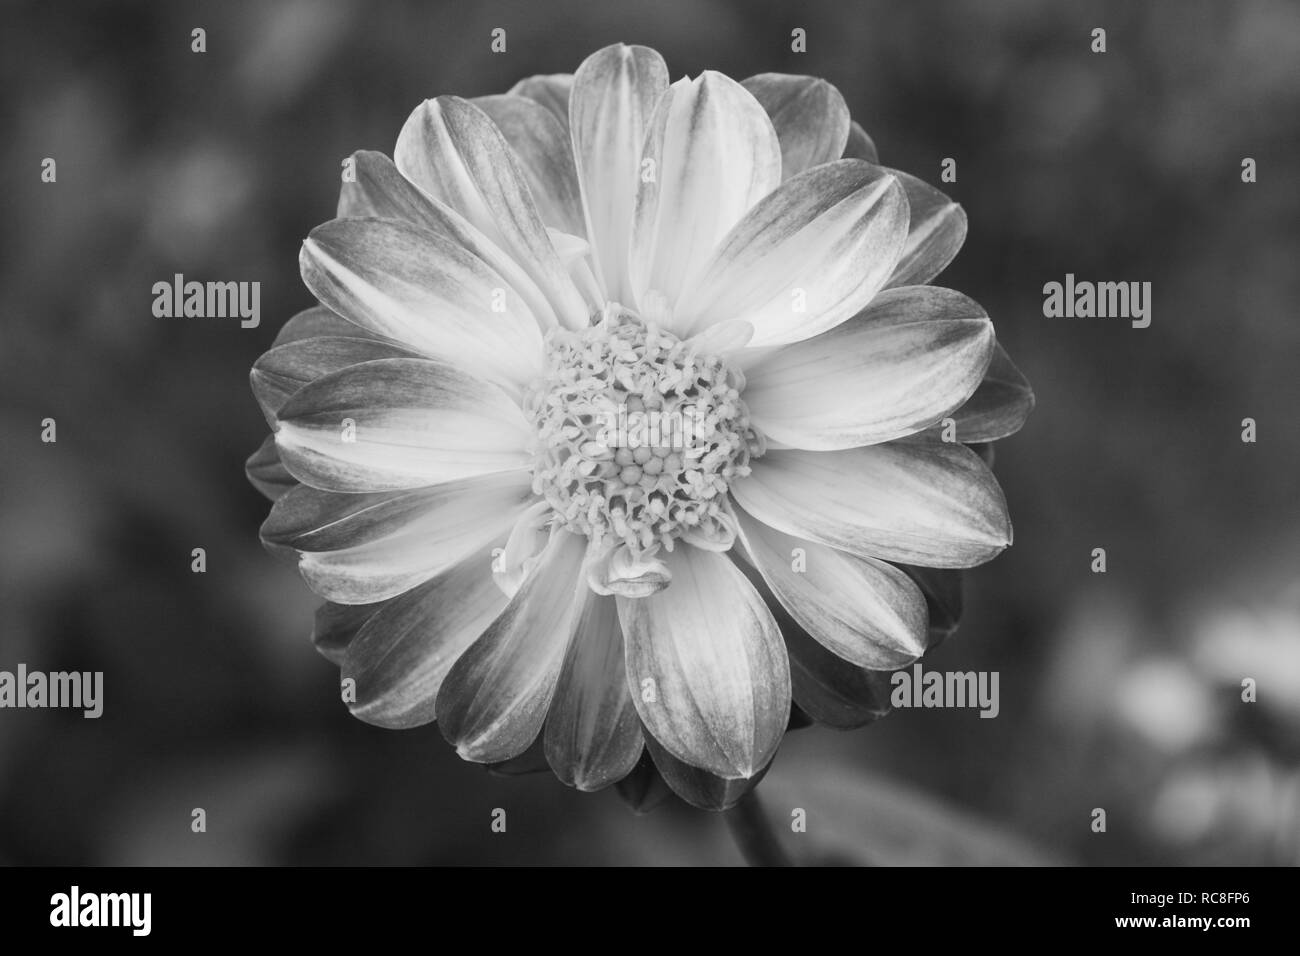 Dahlia flower with light petals with dark tips - monochrome processing Stock Photo